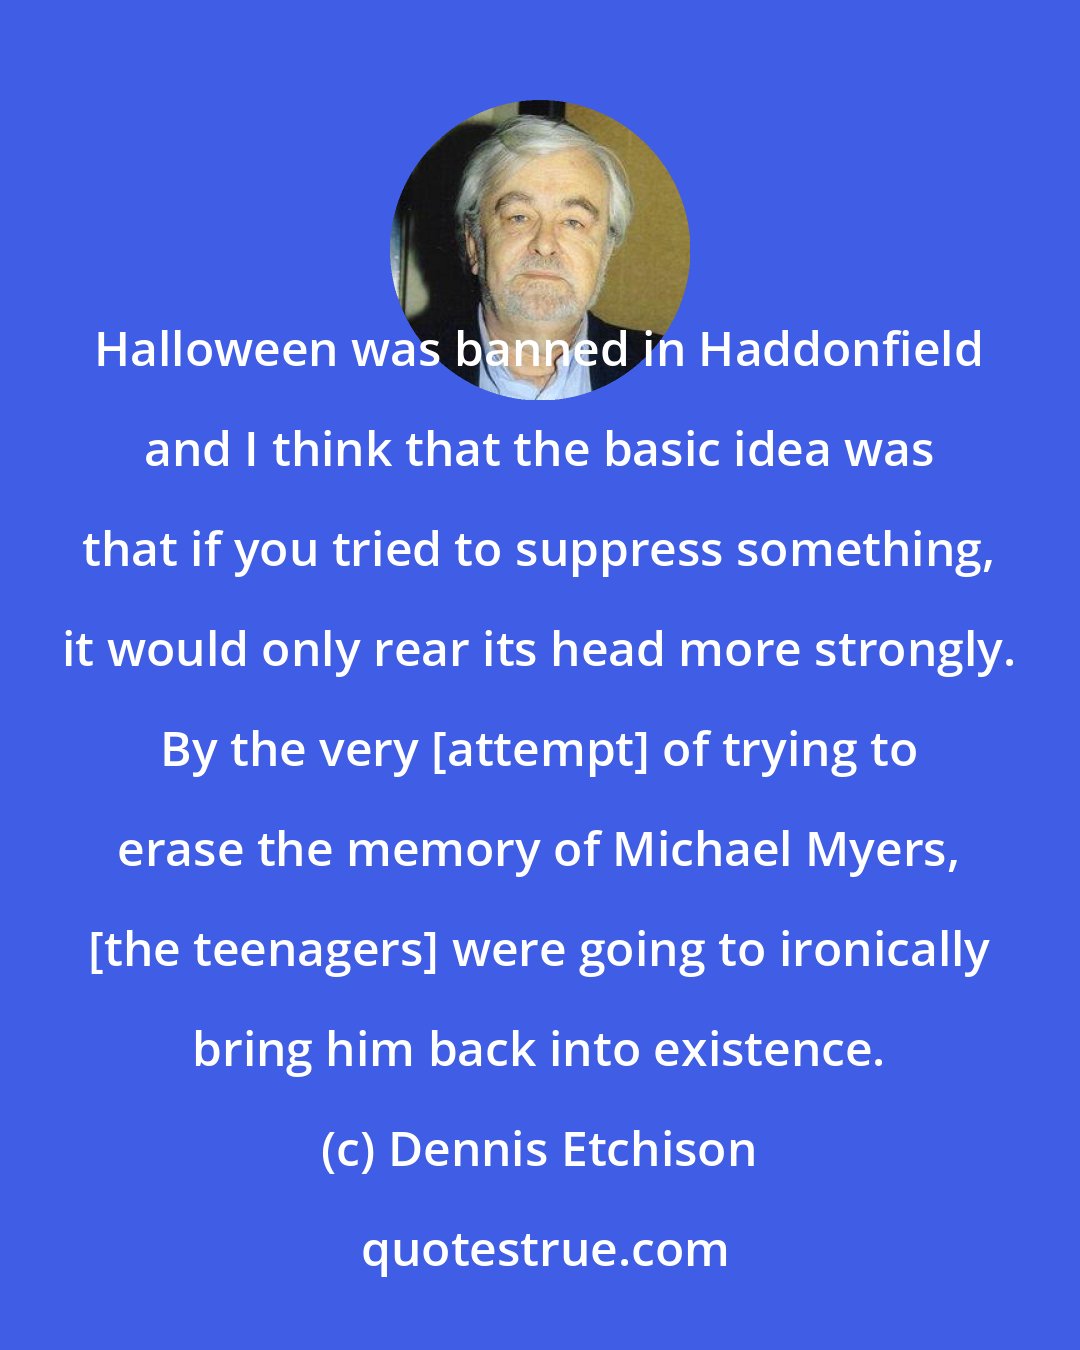 Dennis Etchison: Halloween was banned in Haddonfield and I think that the basic idea was that if you tried to suppress something, it would only rear its head more strongly. By the very [attempt] of trying to erase the memory of Michael Myers, [the teenagers] were going to ironically bring him back into existence.